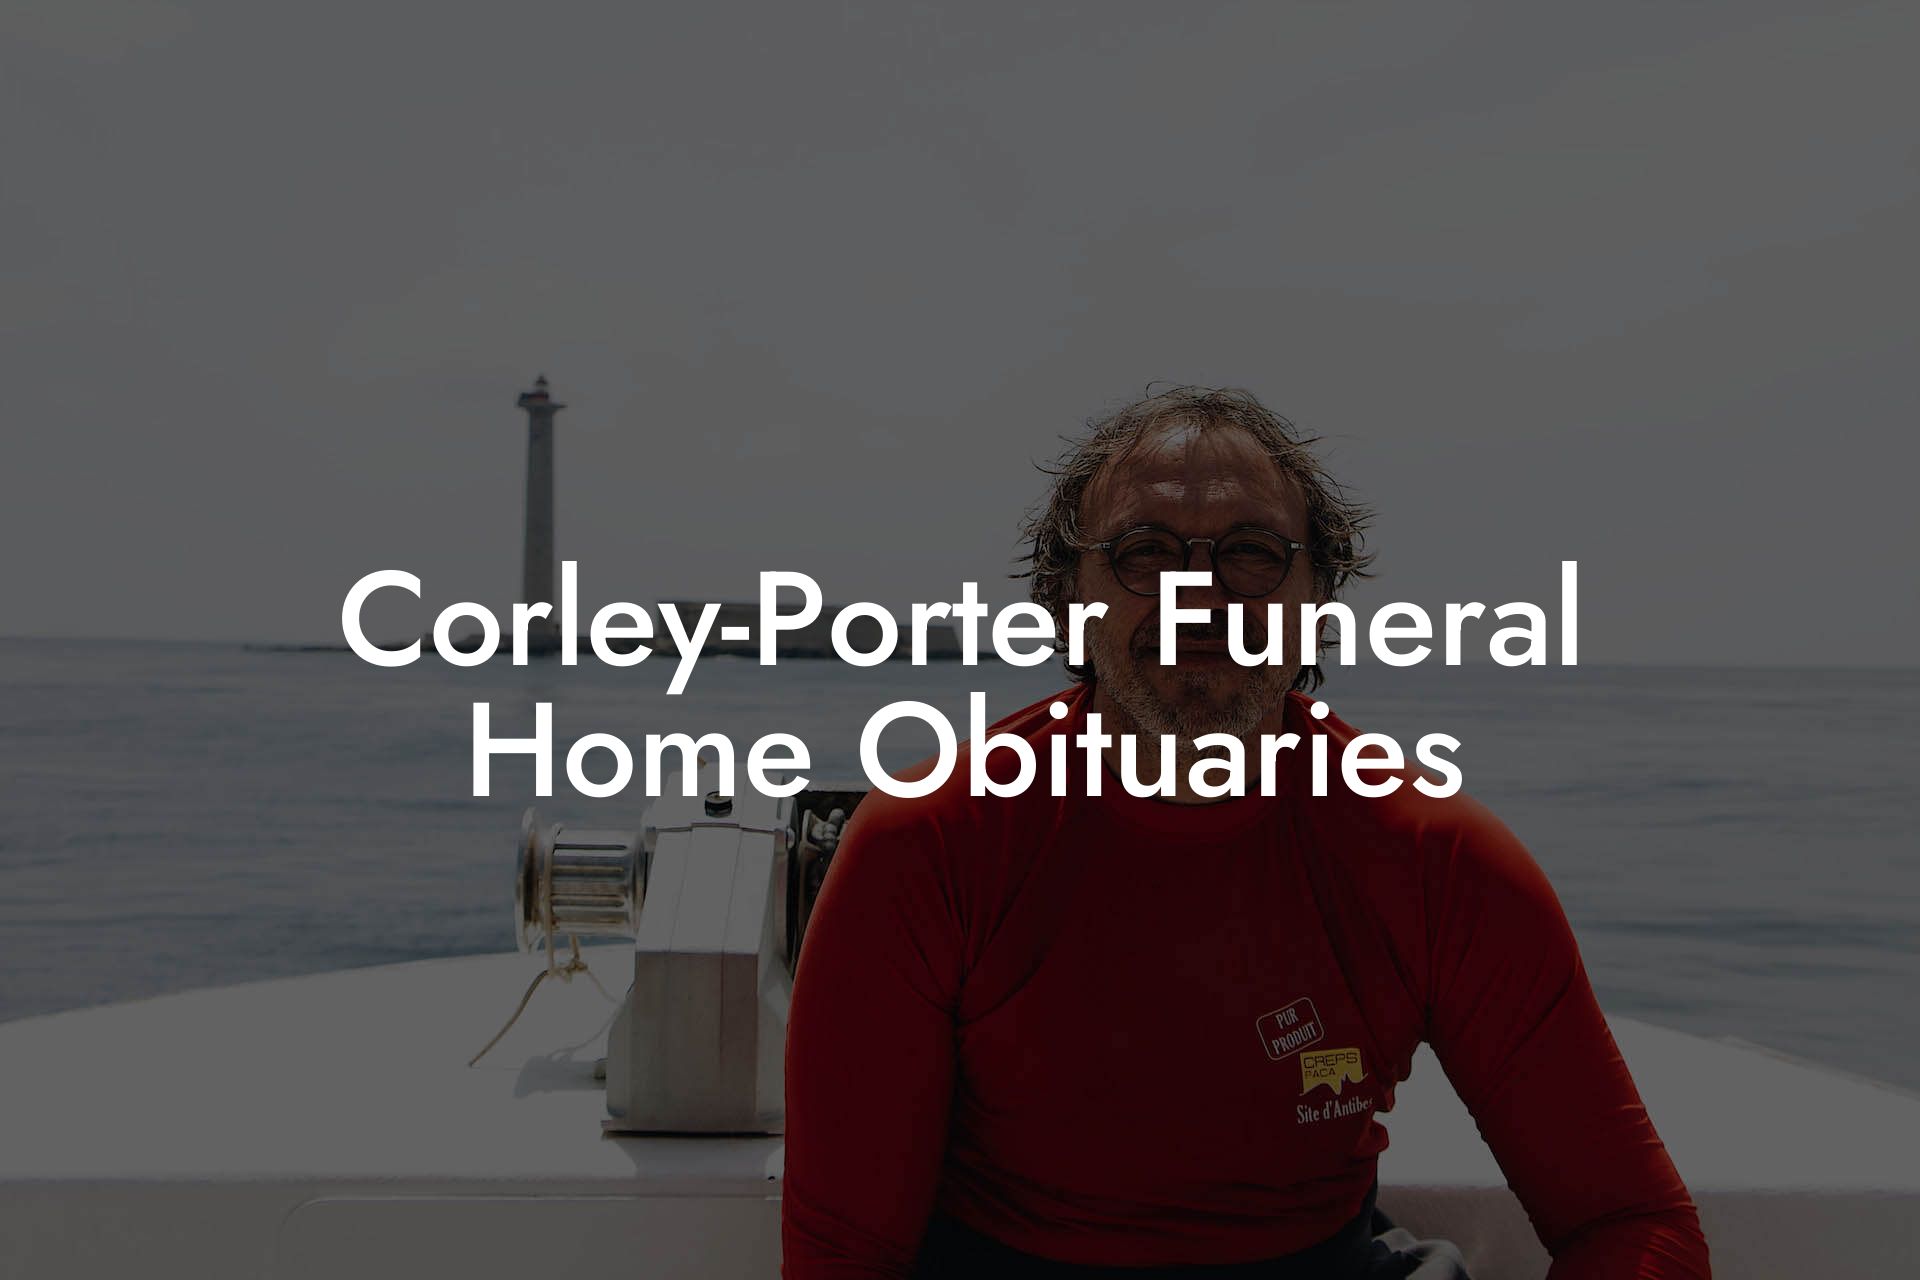 Corley-Porter Funeral Home Obituaries